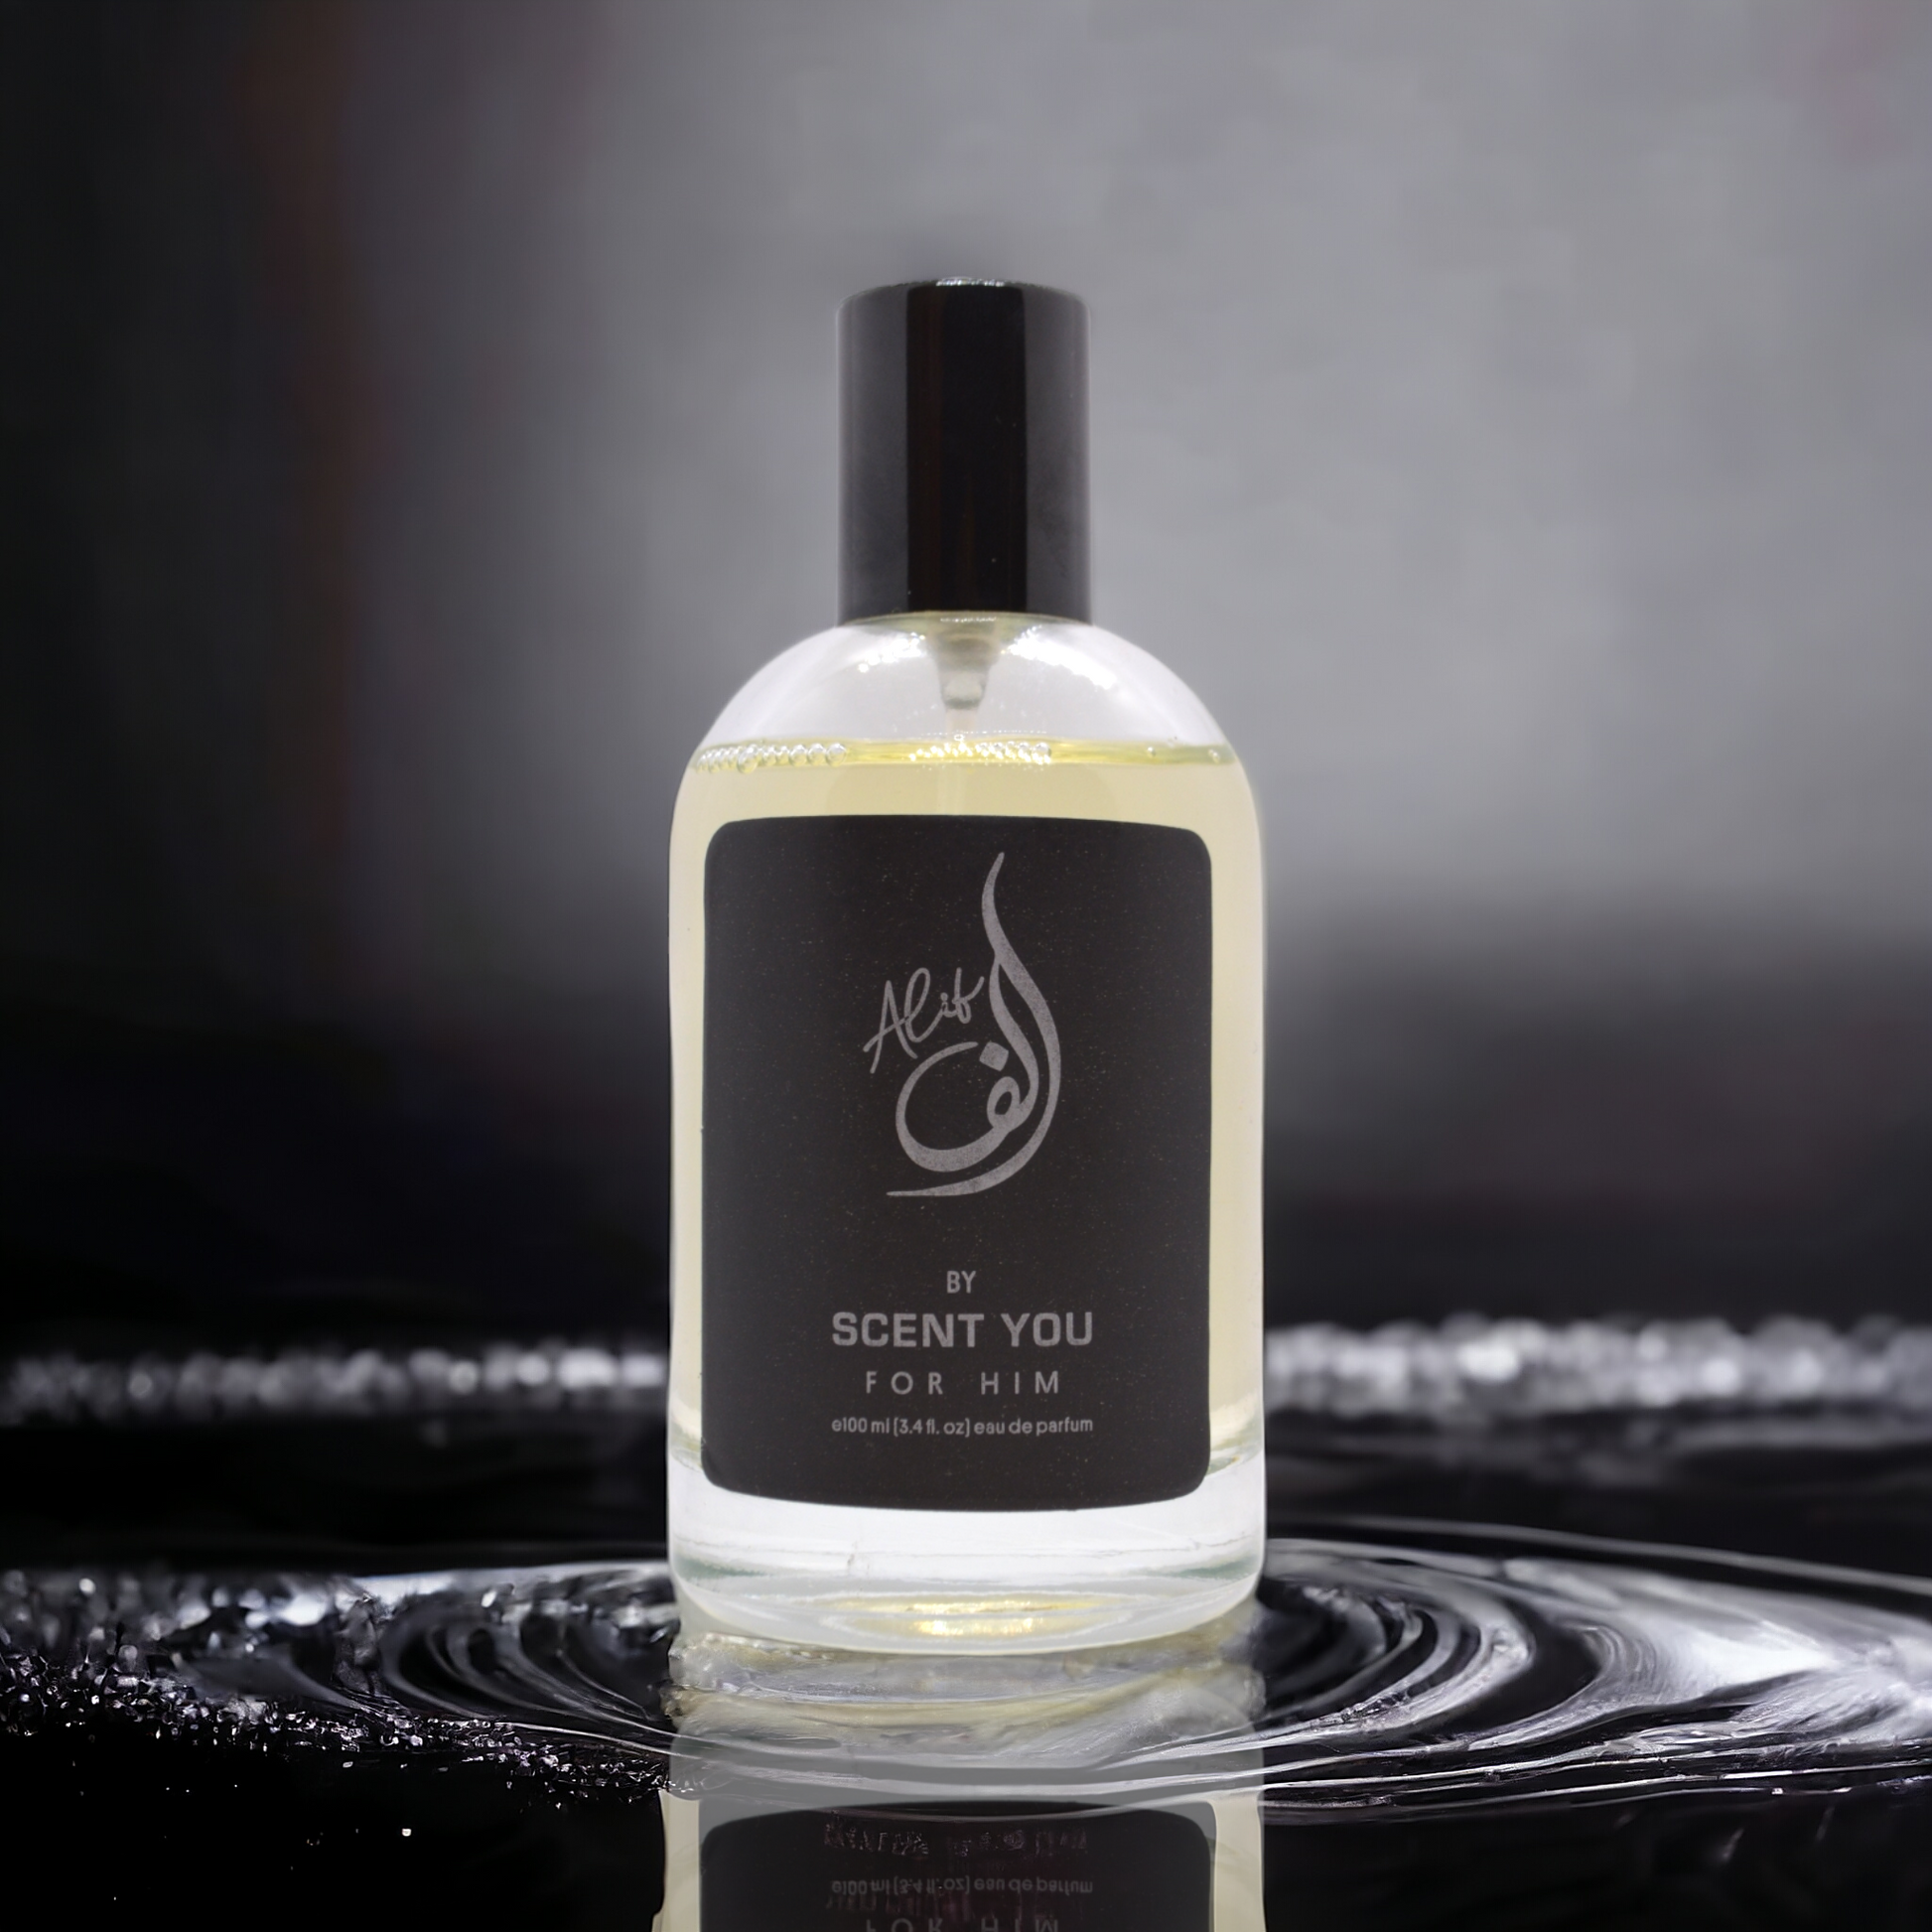 Alif - 100ml | Nearest Match to Tom Ford Oud Wood | Scent You